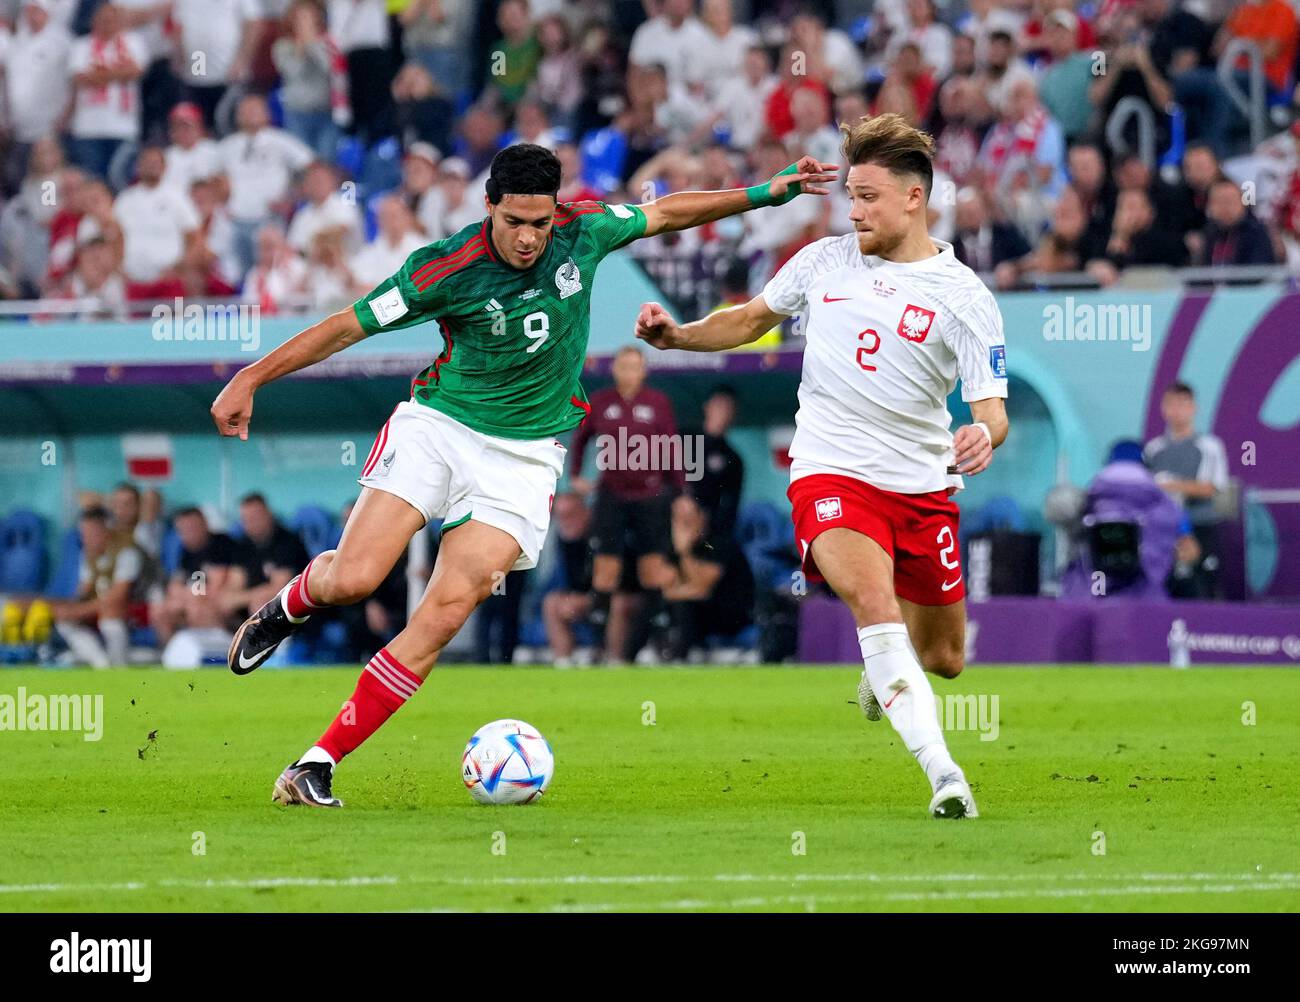 Mexico's Raul Jimenez (left) and Poland's Matty Cash battle for the ball during the FIFA World Cup Group C match at Stadium 974, Rass Abou Aboud. Picture date: Tuesday November 22, 2022. Stock Photo